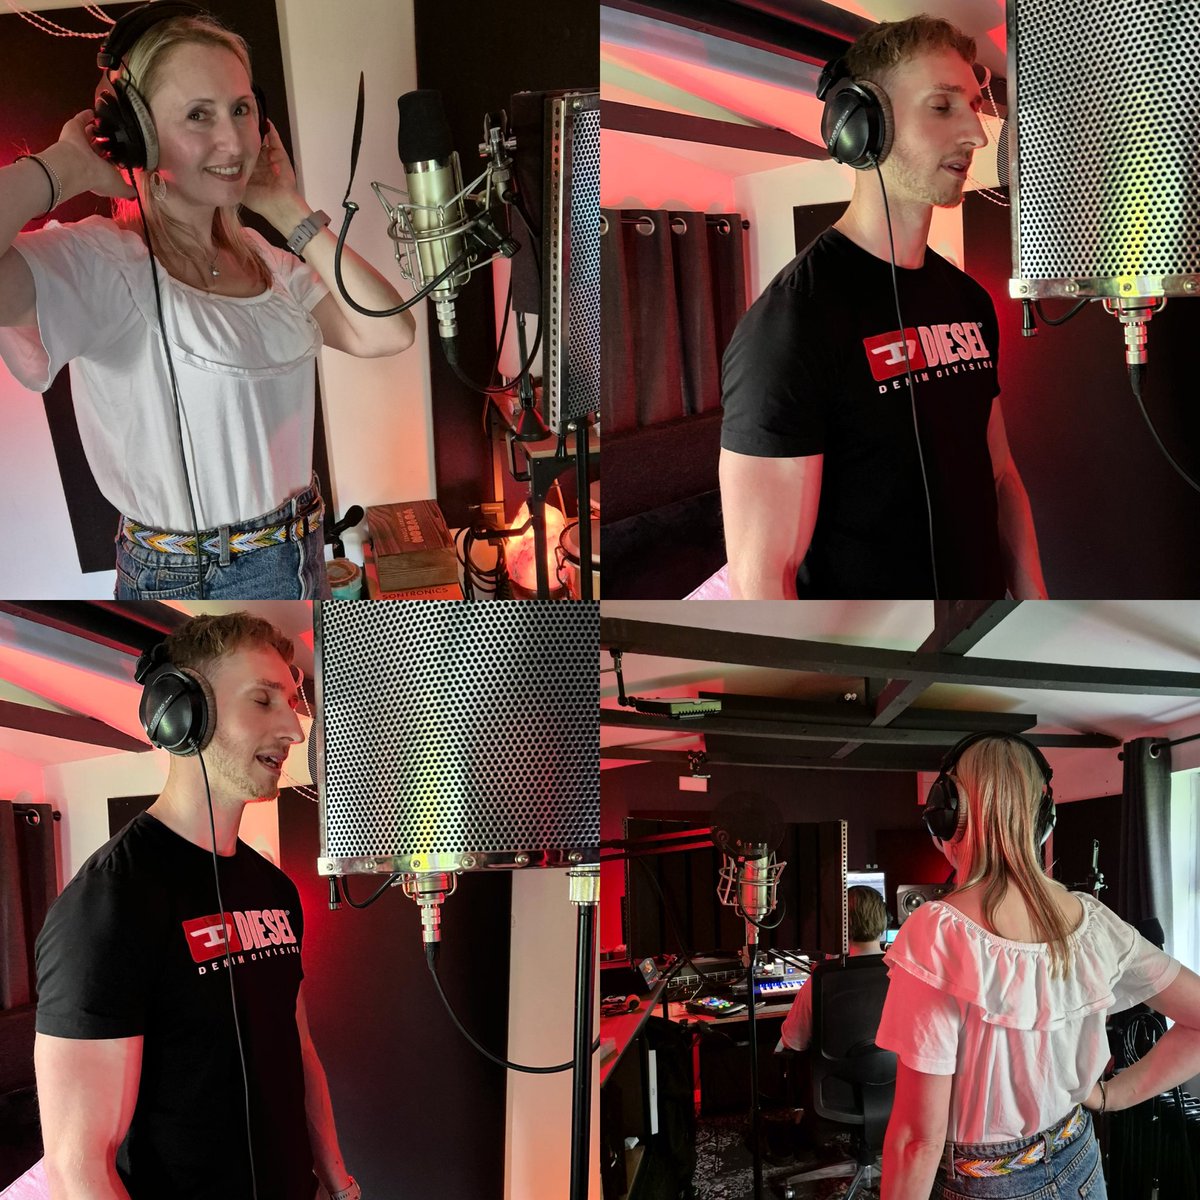 Movie trilogies are a thing, so @SarahMusicSongs and I thought, why not make collab trilogies a thing as well? We were back in the studio with Luke Targett today, and we'll be sharing something special with you soon 🙌